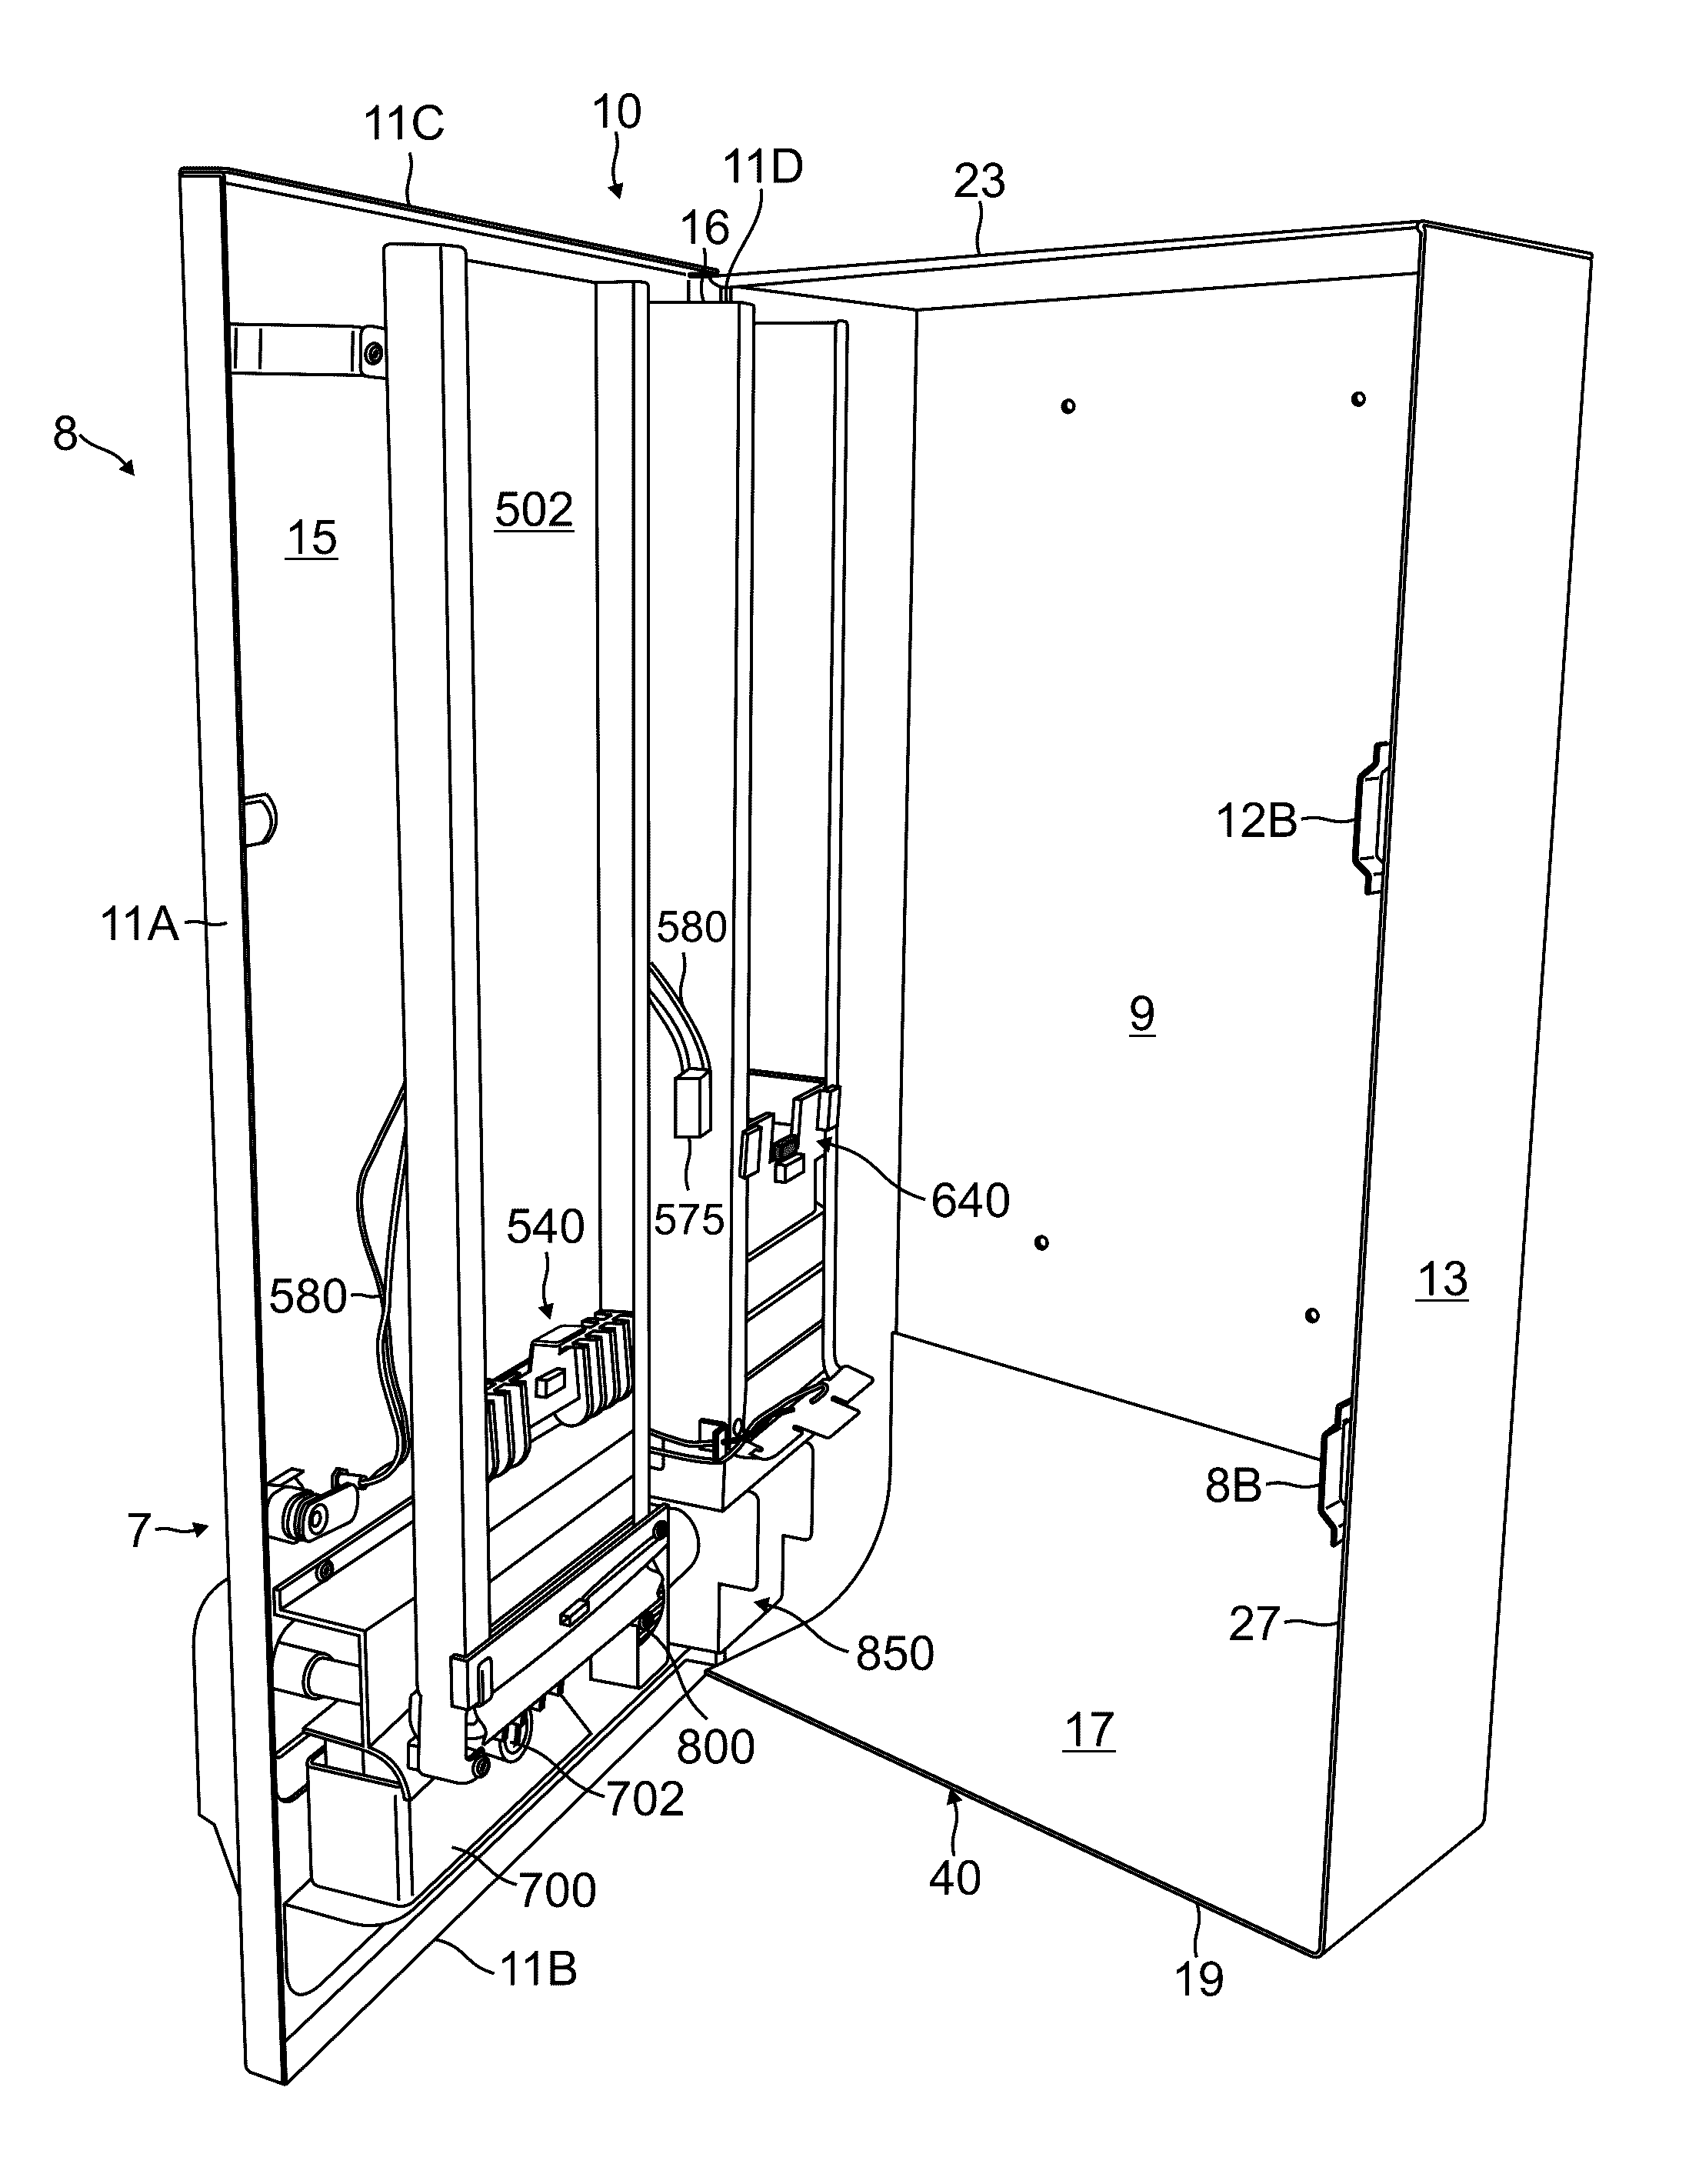 Vending machine for retaining and dispensing feminine hygiene products through a novel coin operating apparatus